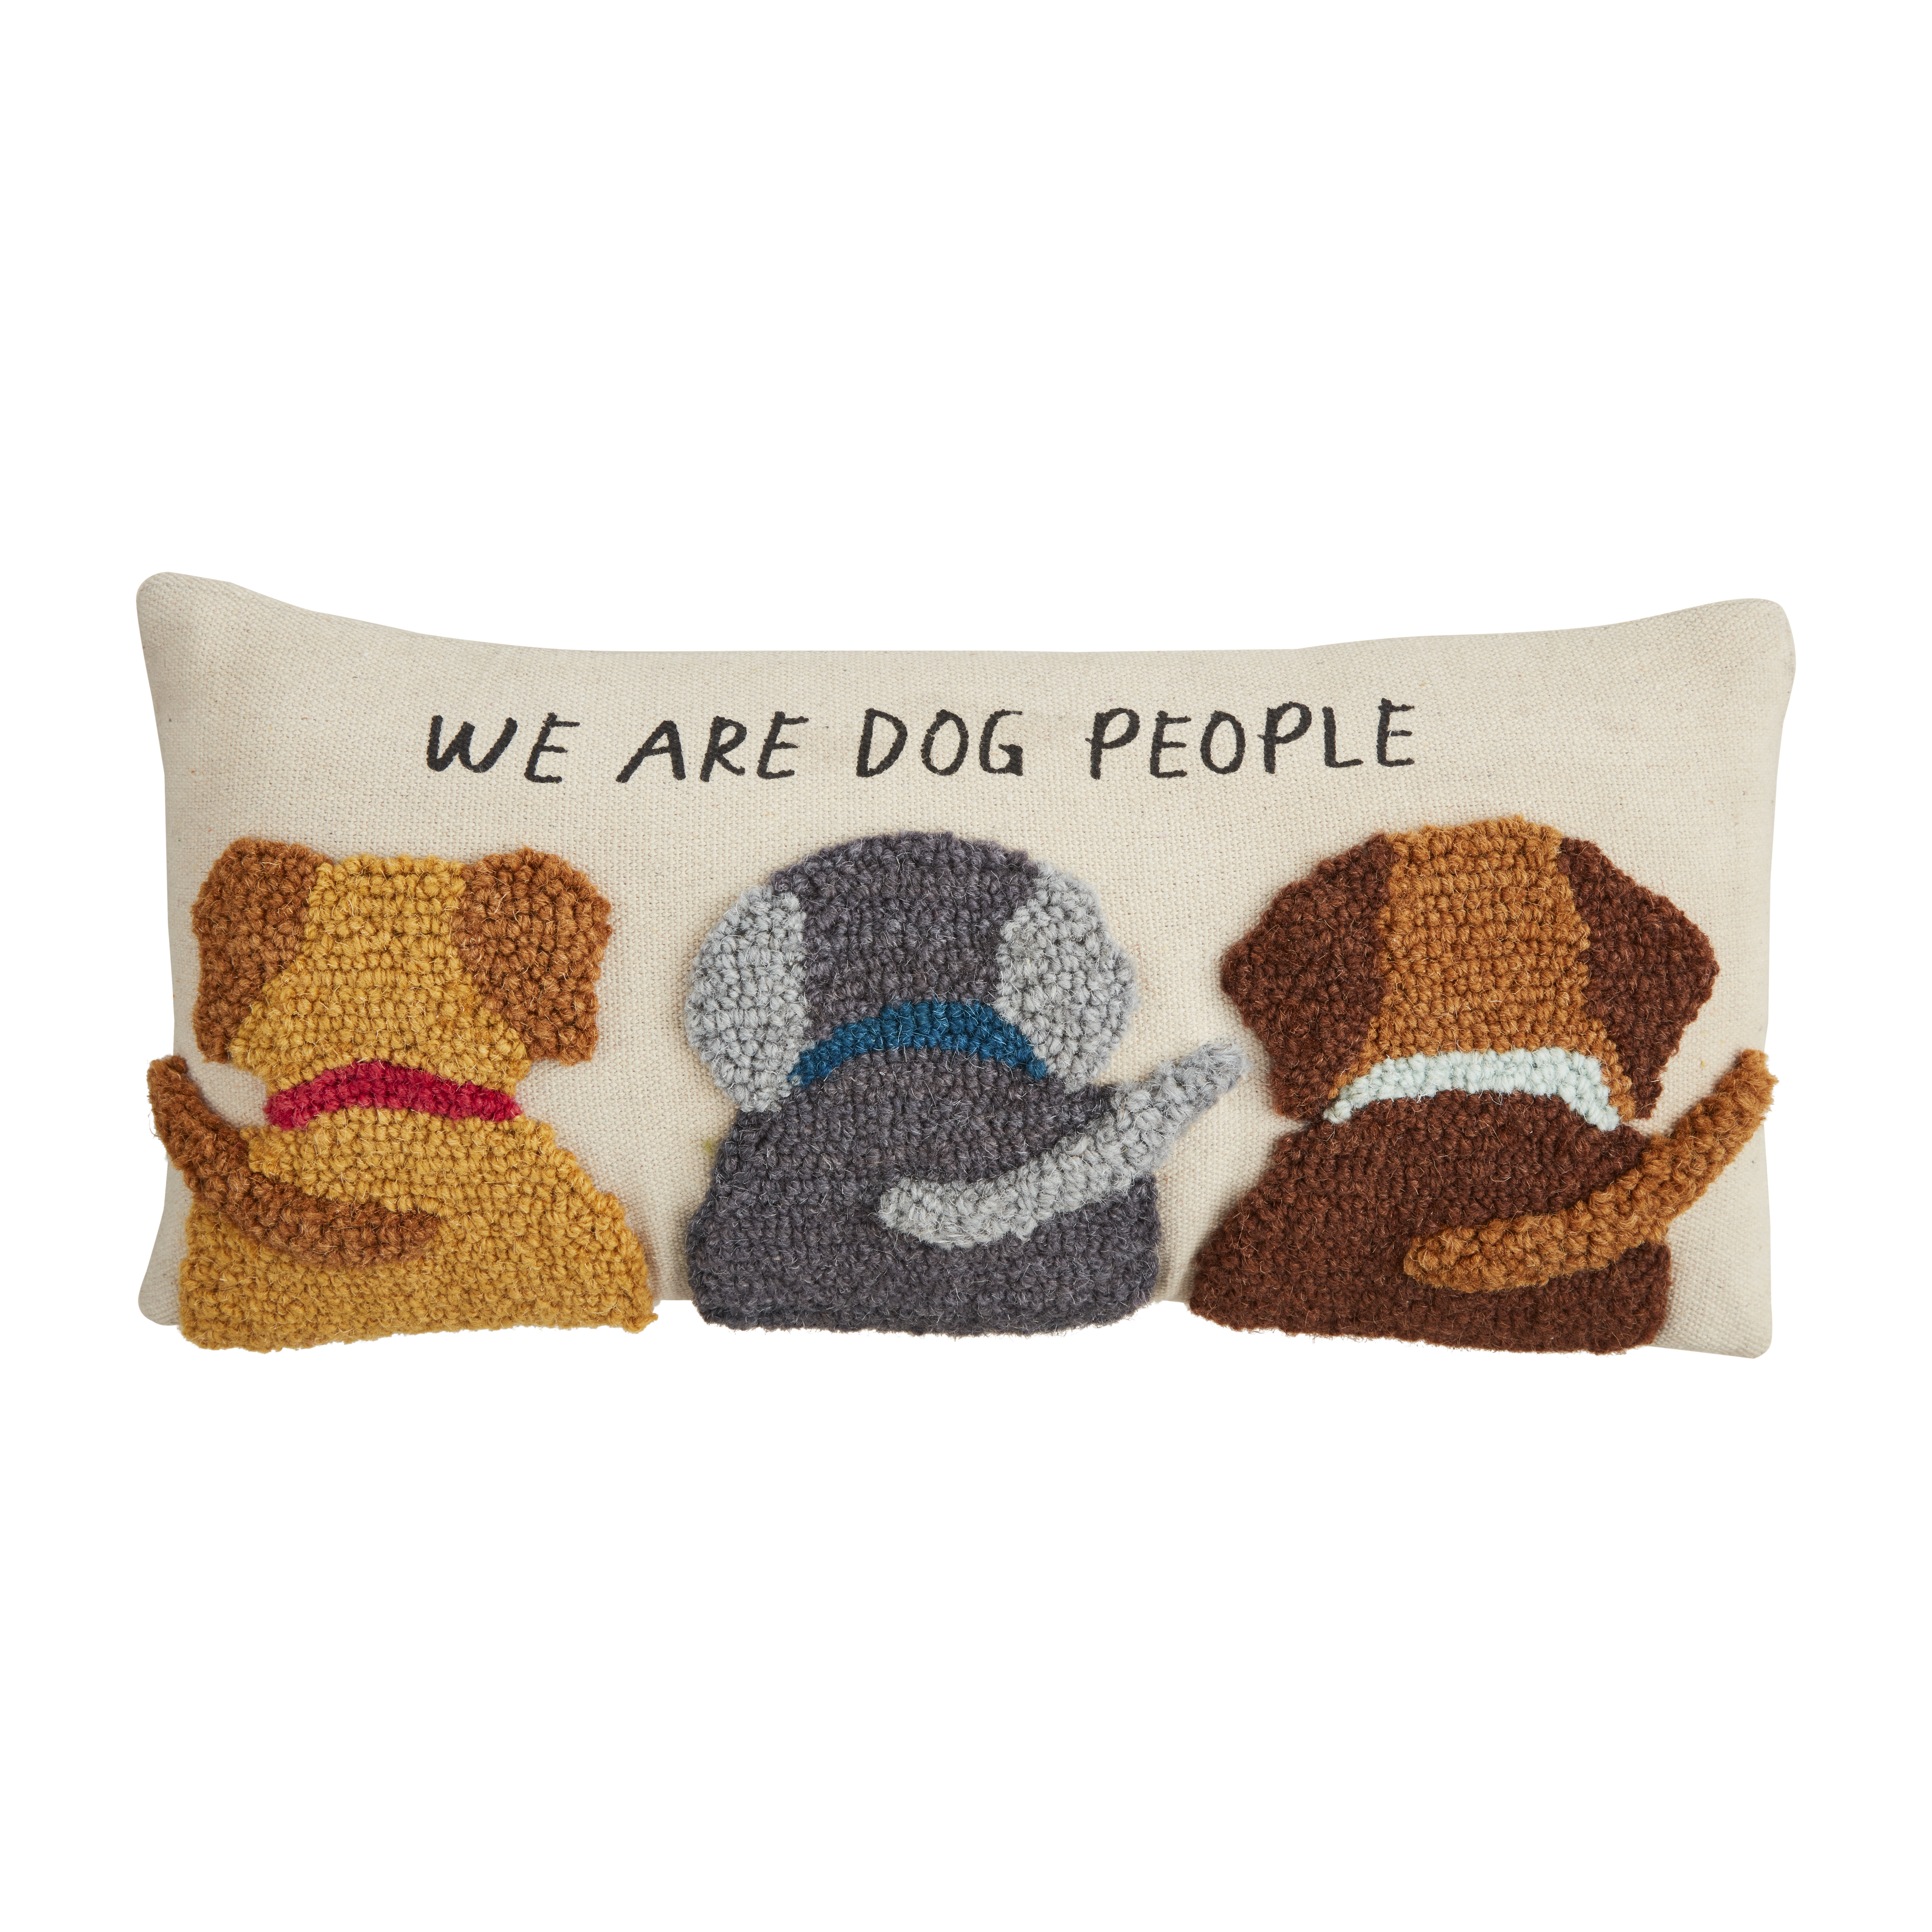 Hooked Dog Pillows 
															/ Mud Pie							